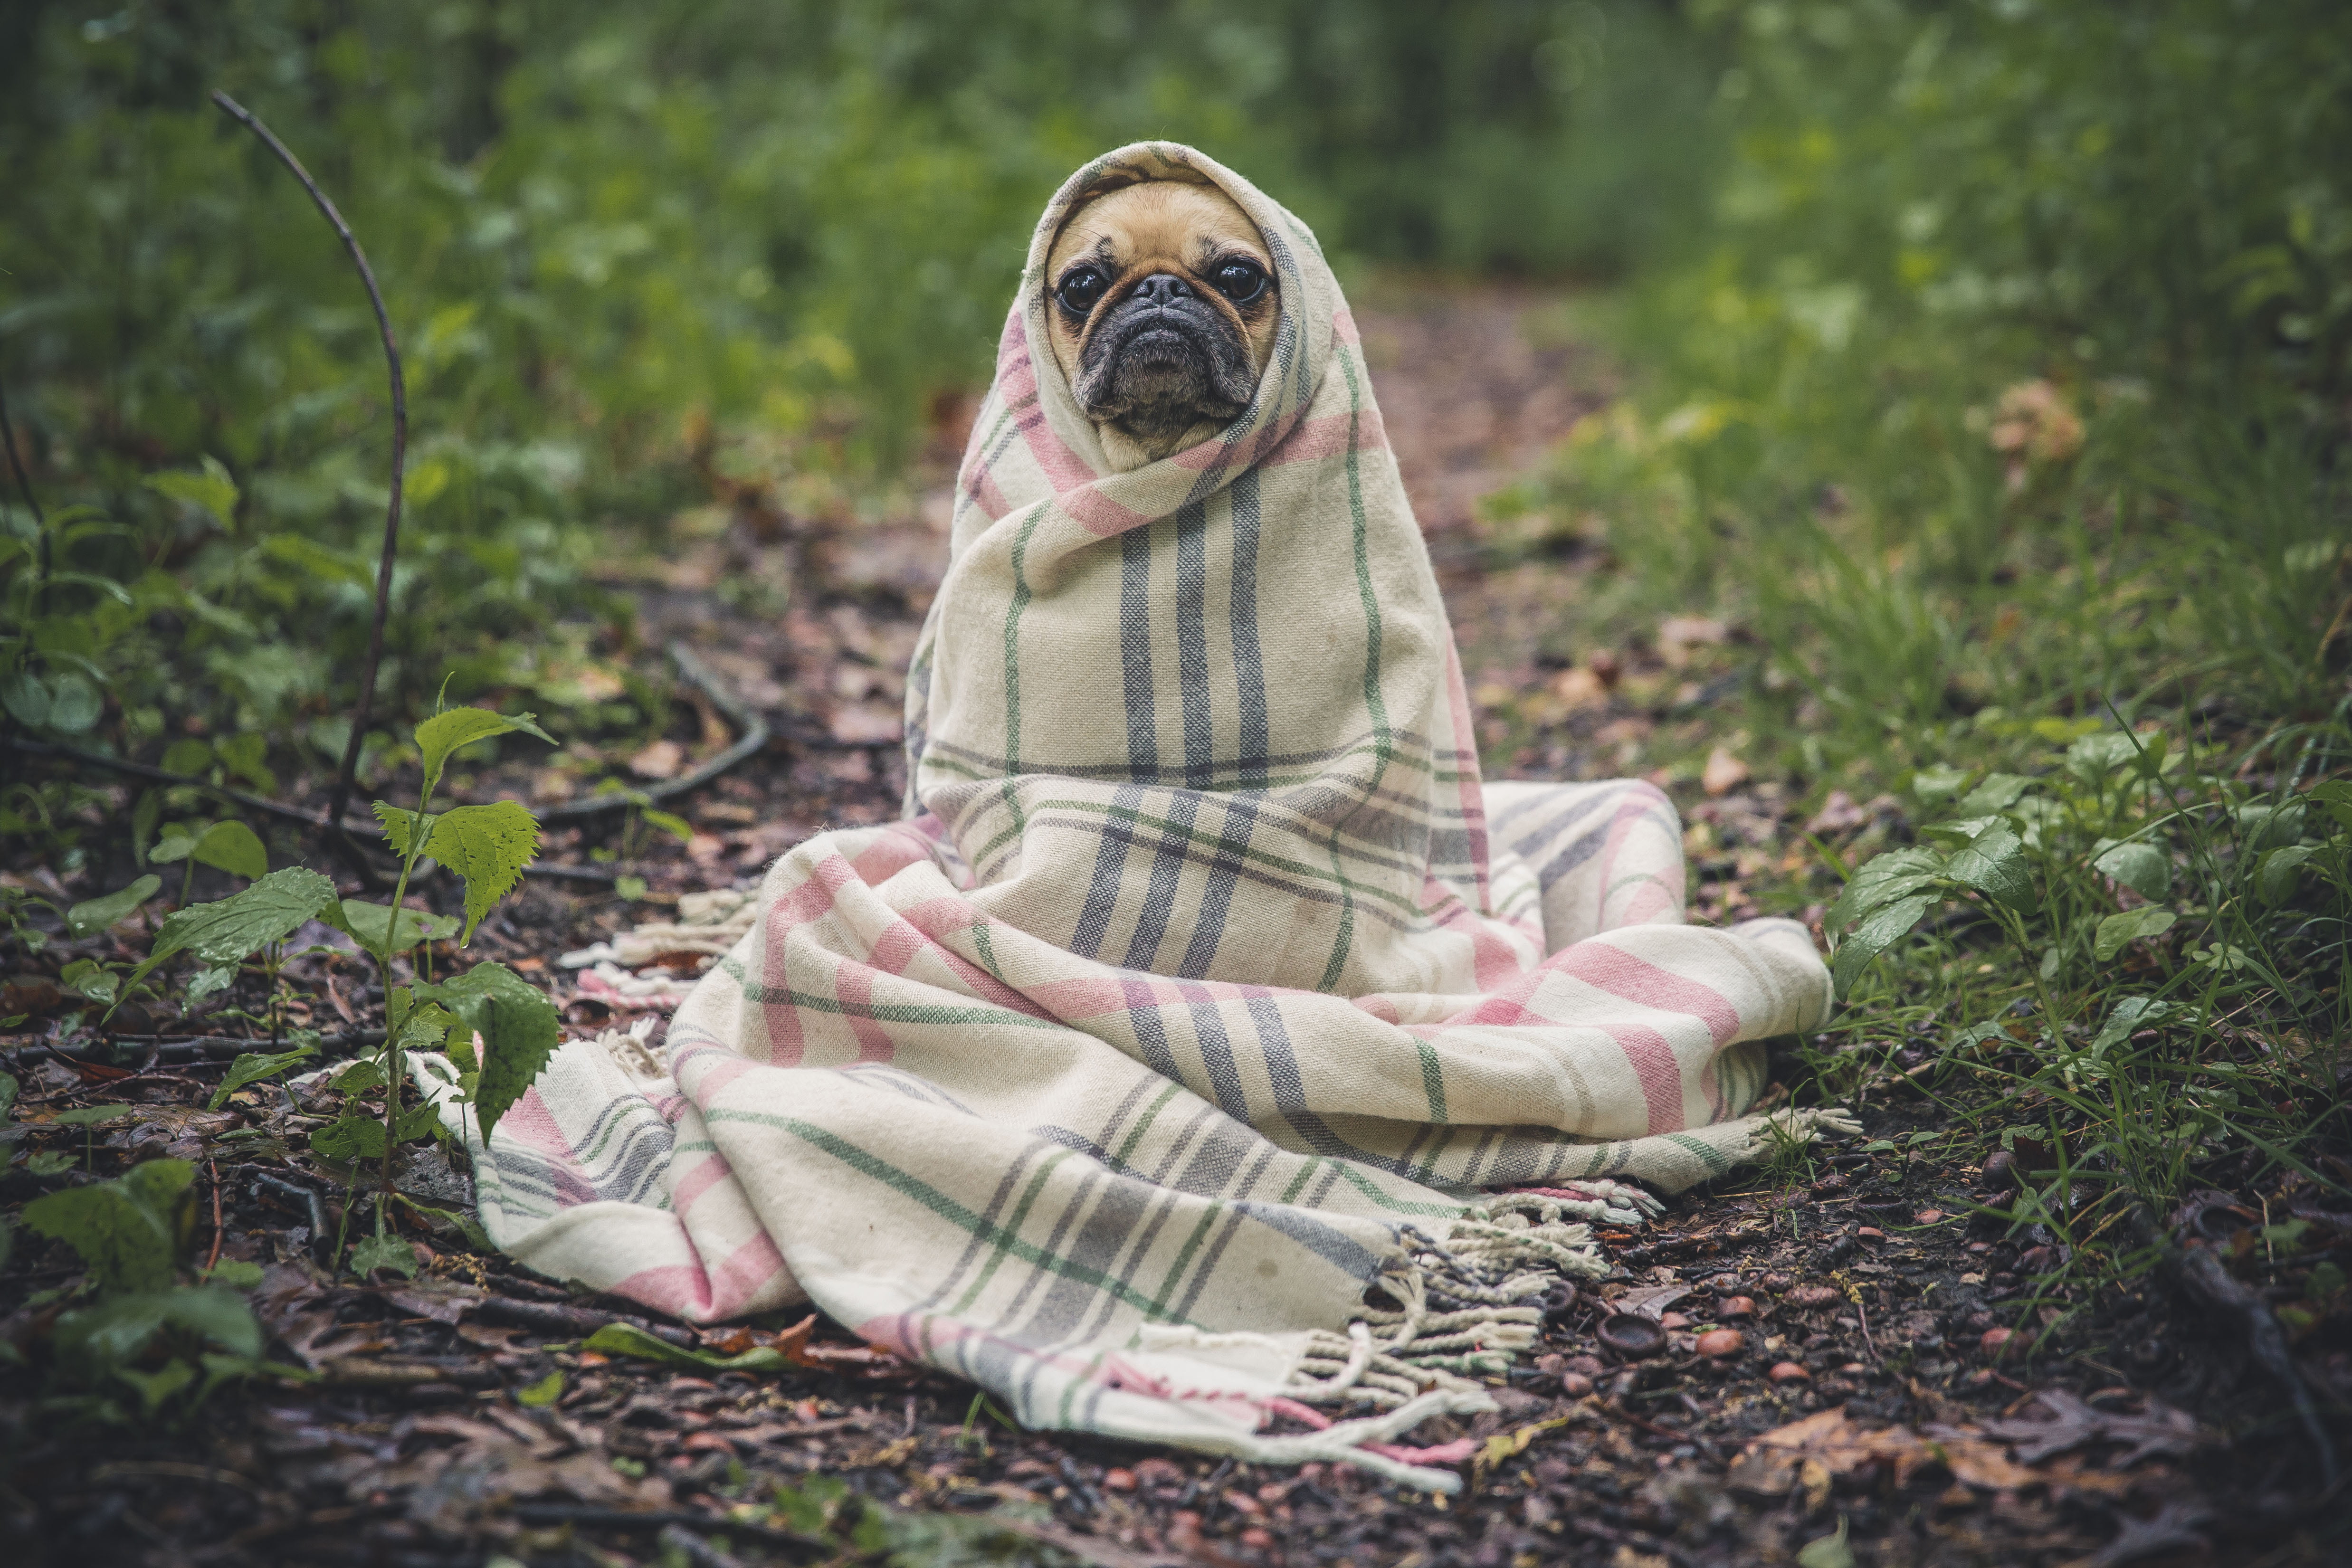 Fawn Pug cover by plaid blanket at daytime, old woman, in the woods.